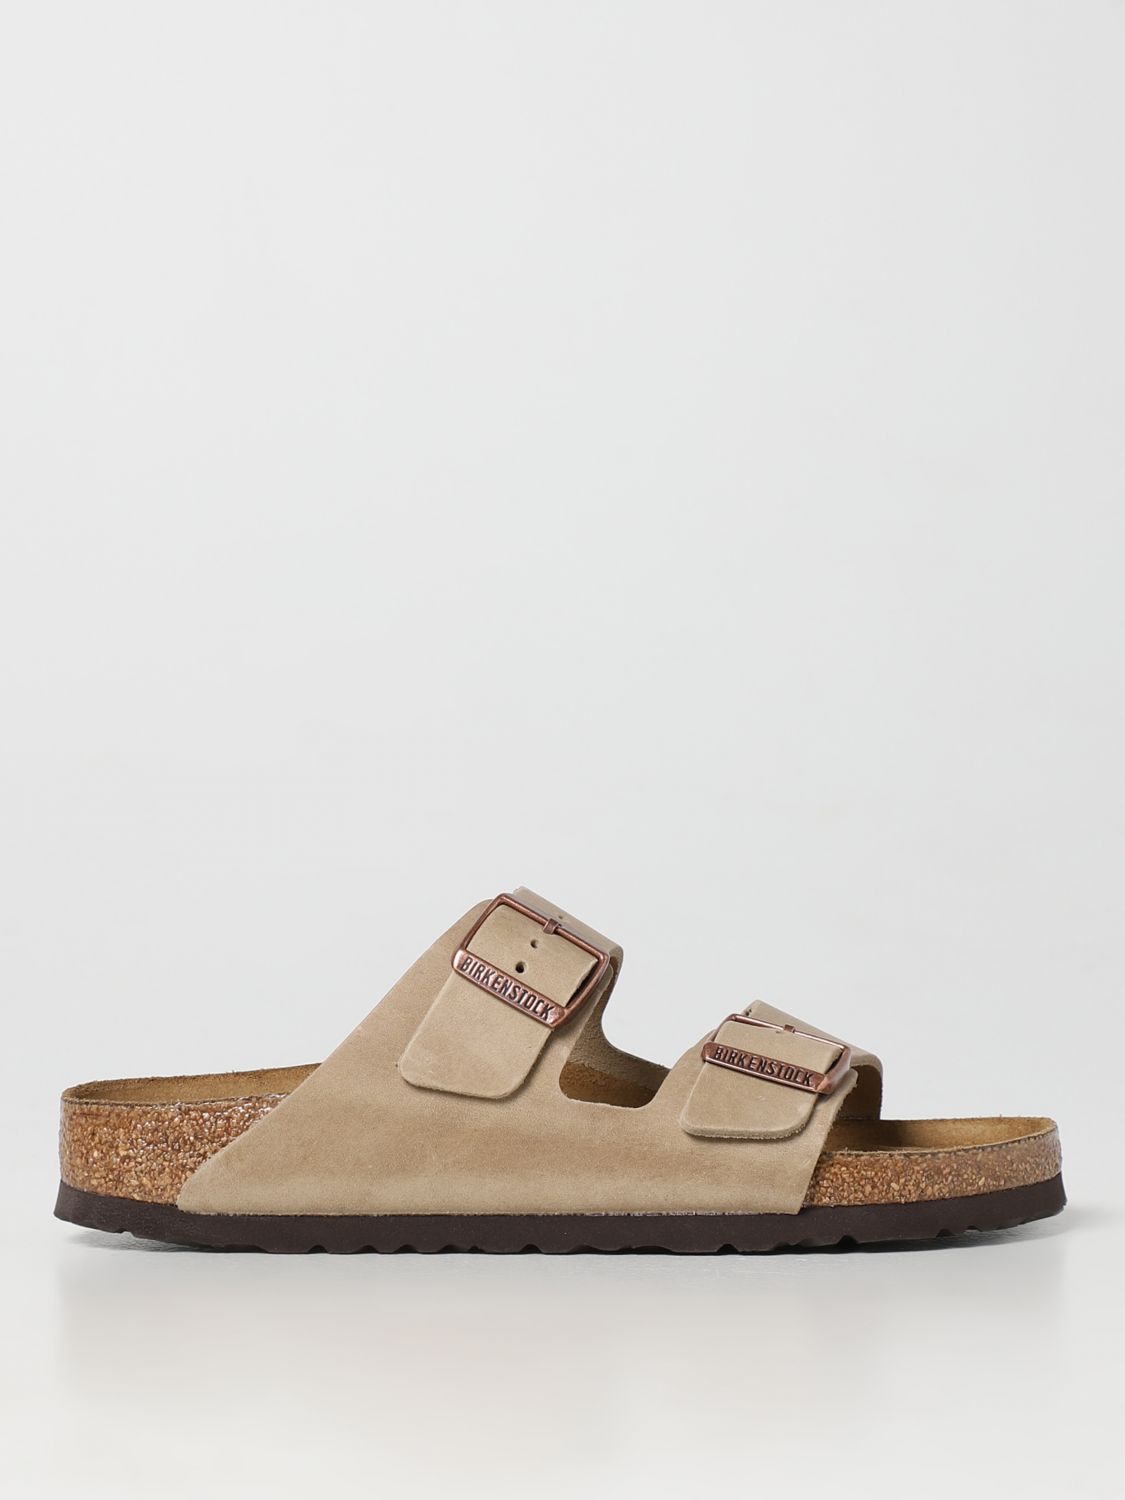 flat sandals for woman - Tobacco | Birkenstock flat 552813 on GIGLIO.COM